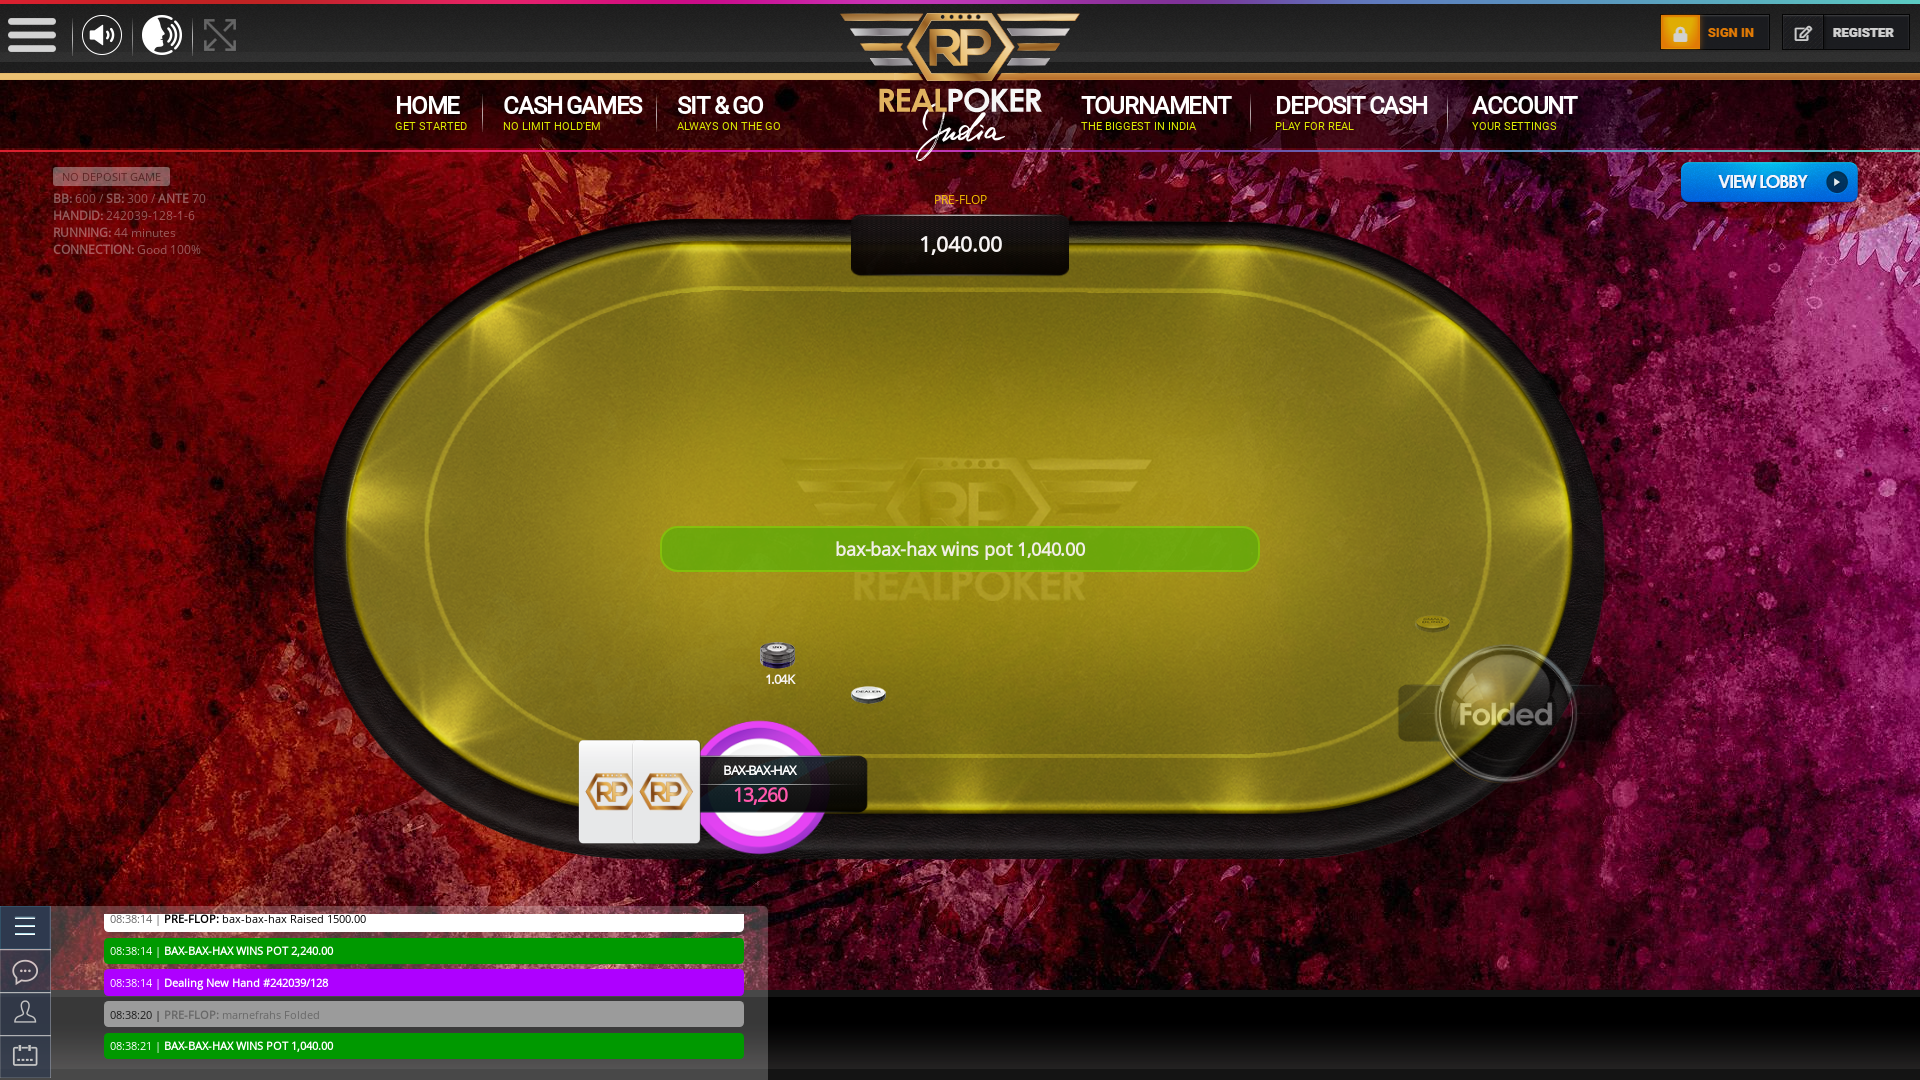 Indian online poker on a 10 player table in the 44th minute match up